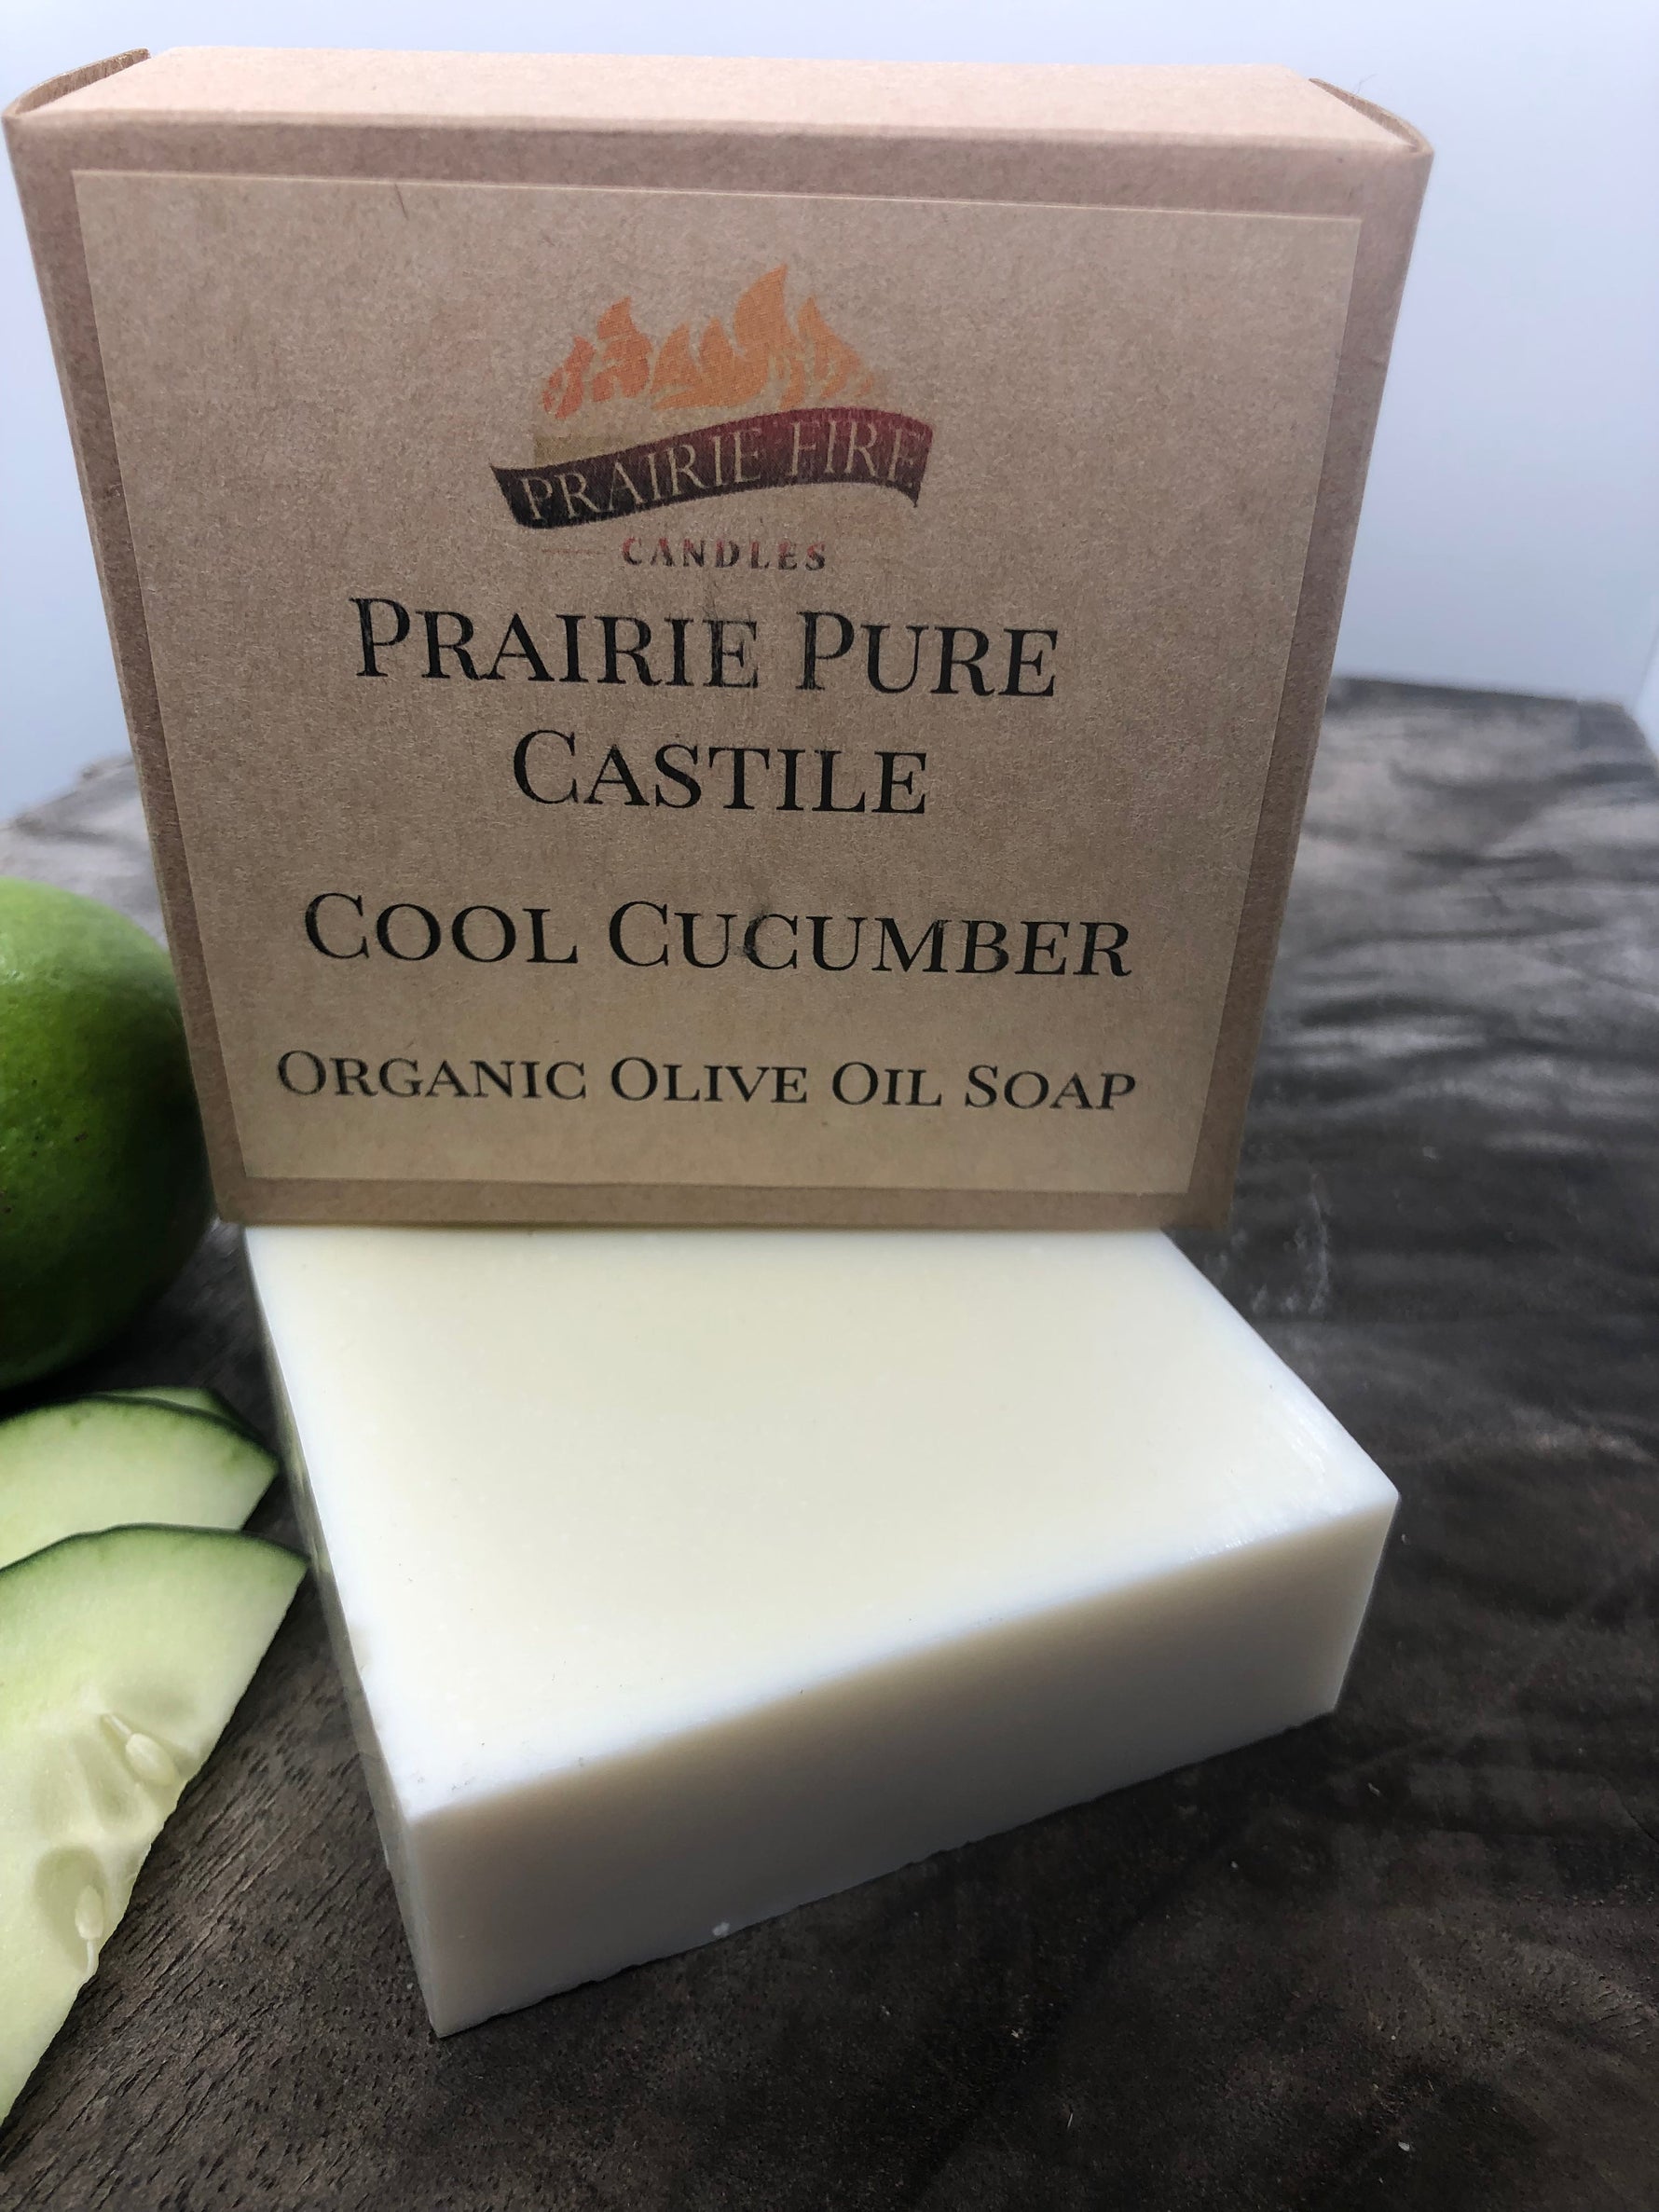 Cool Cucumber Real Castile Organic Olive Oil Soap for Sensitive Skin - Dye Free - 100% Certified Organic Extra Virgin Olive Oil-4